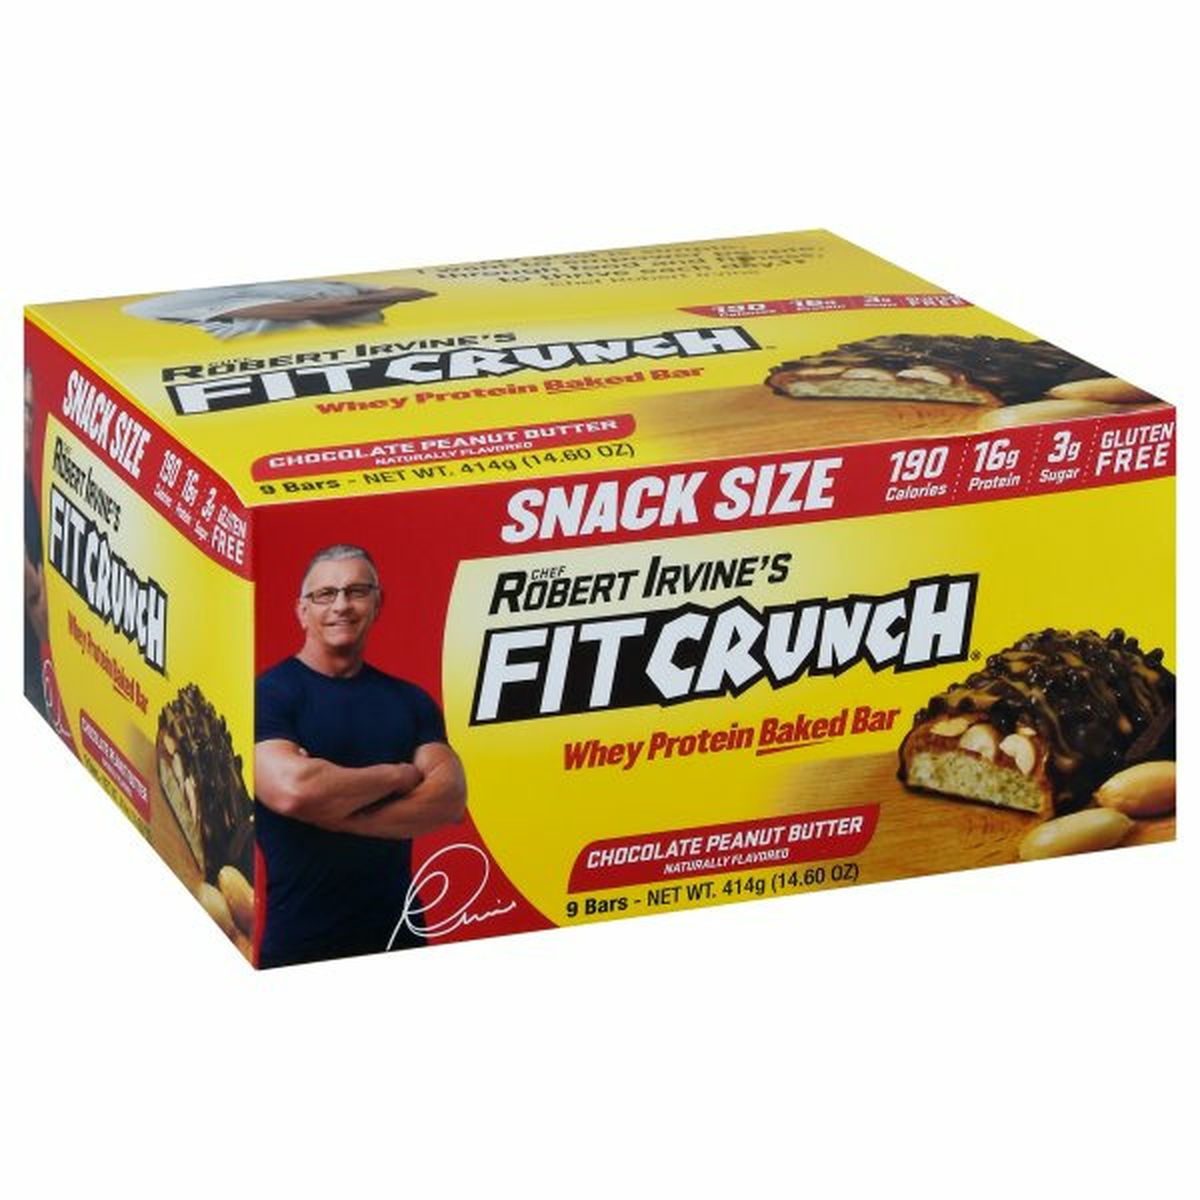 Calories in Fit Crunch Whey Protein Baked Bar, Chocolate Peanut Butter, Snack Size